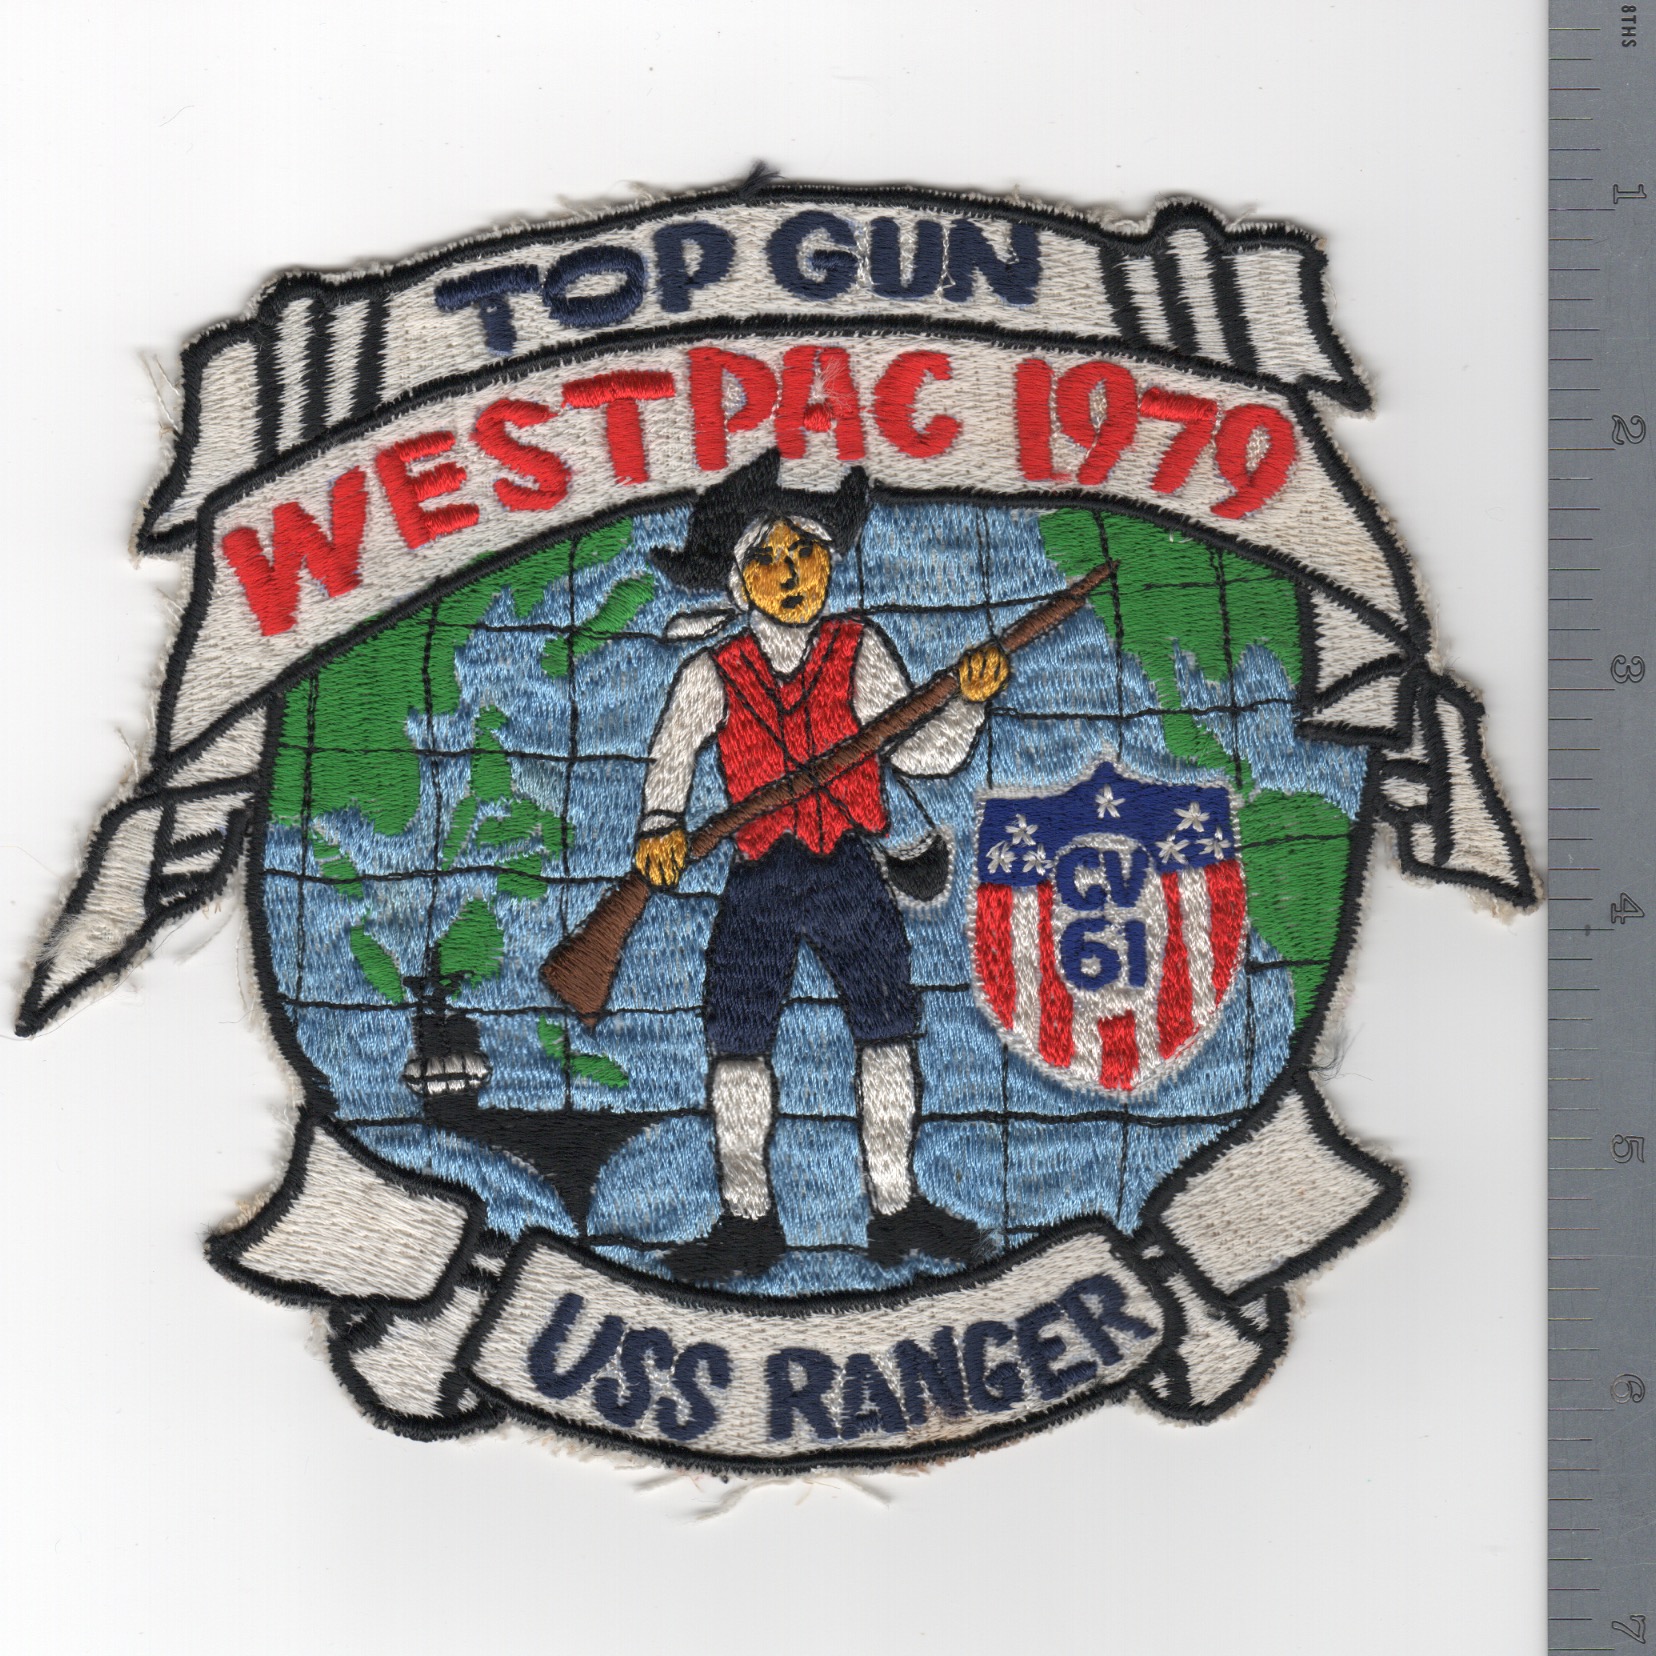 356) CV-61 1979 WestPac Backpatch Cruise Patch